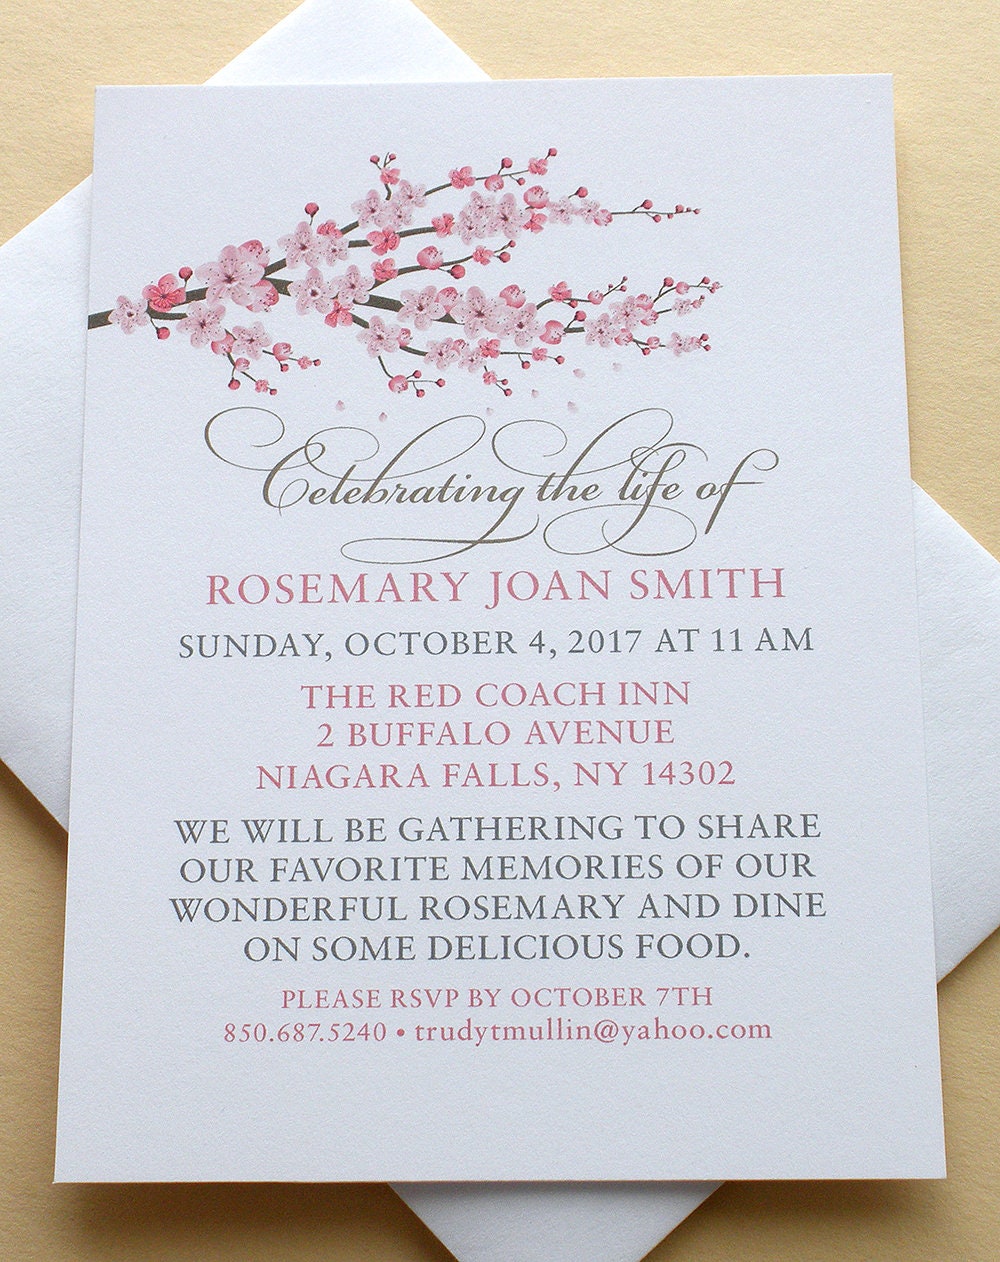 Celebration of Life Invitations with a Branch of Pink Blossoms